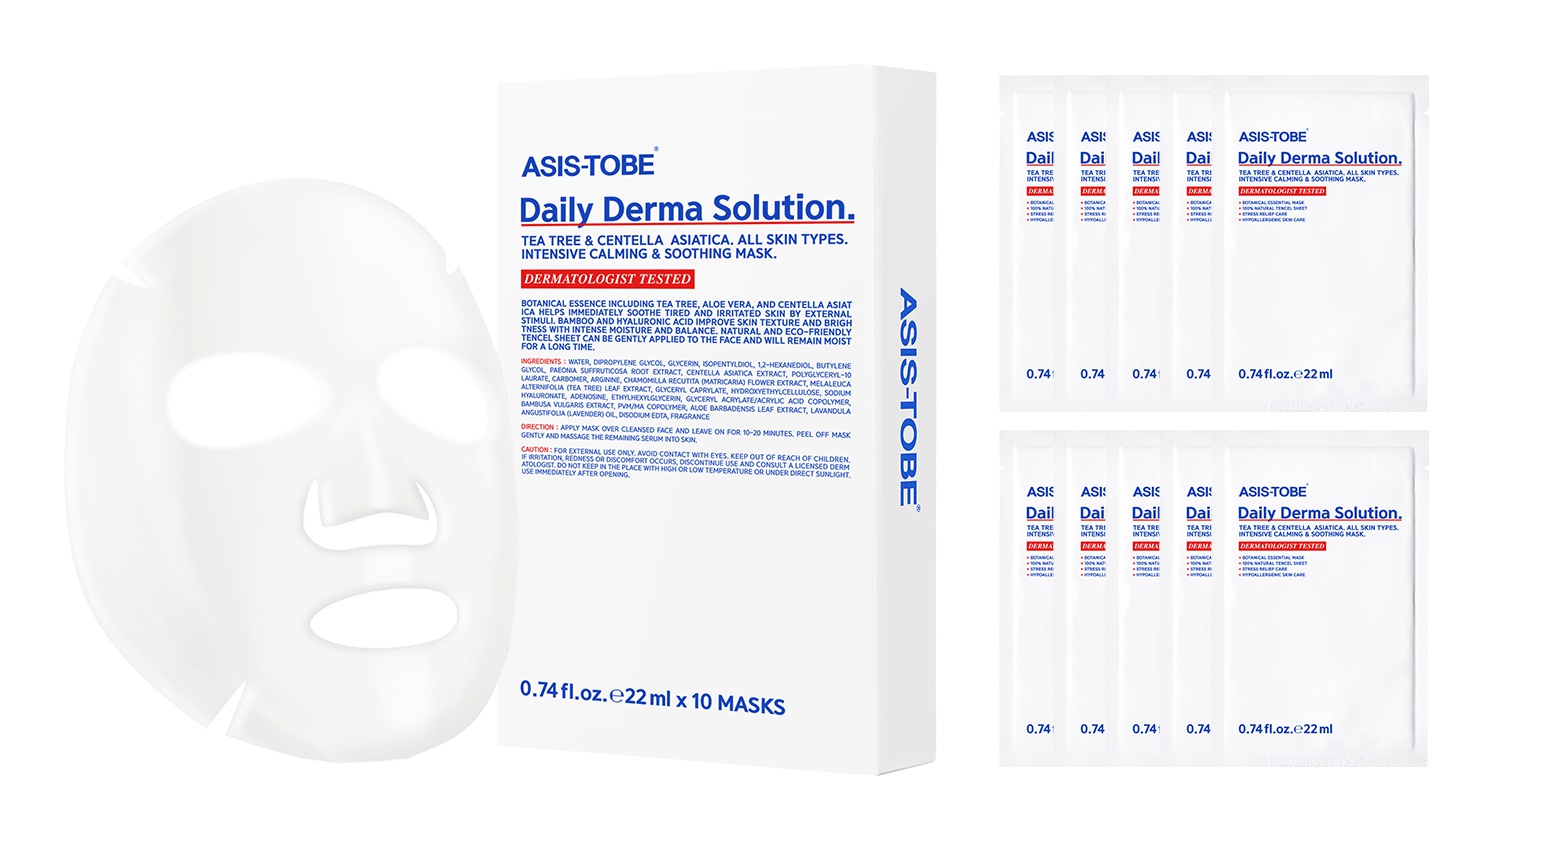 ASIS-TOBE Daily Derma Solution